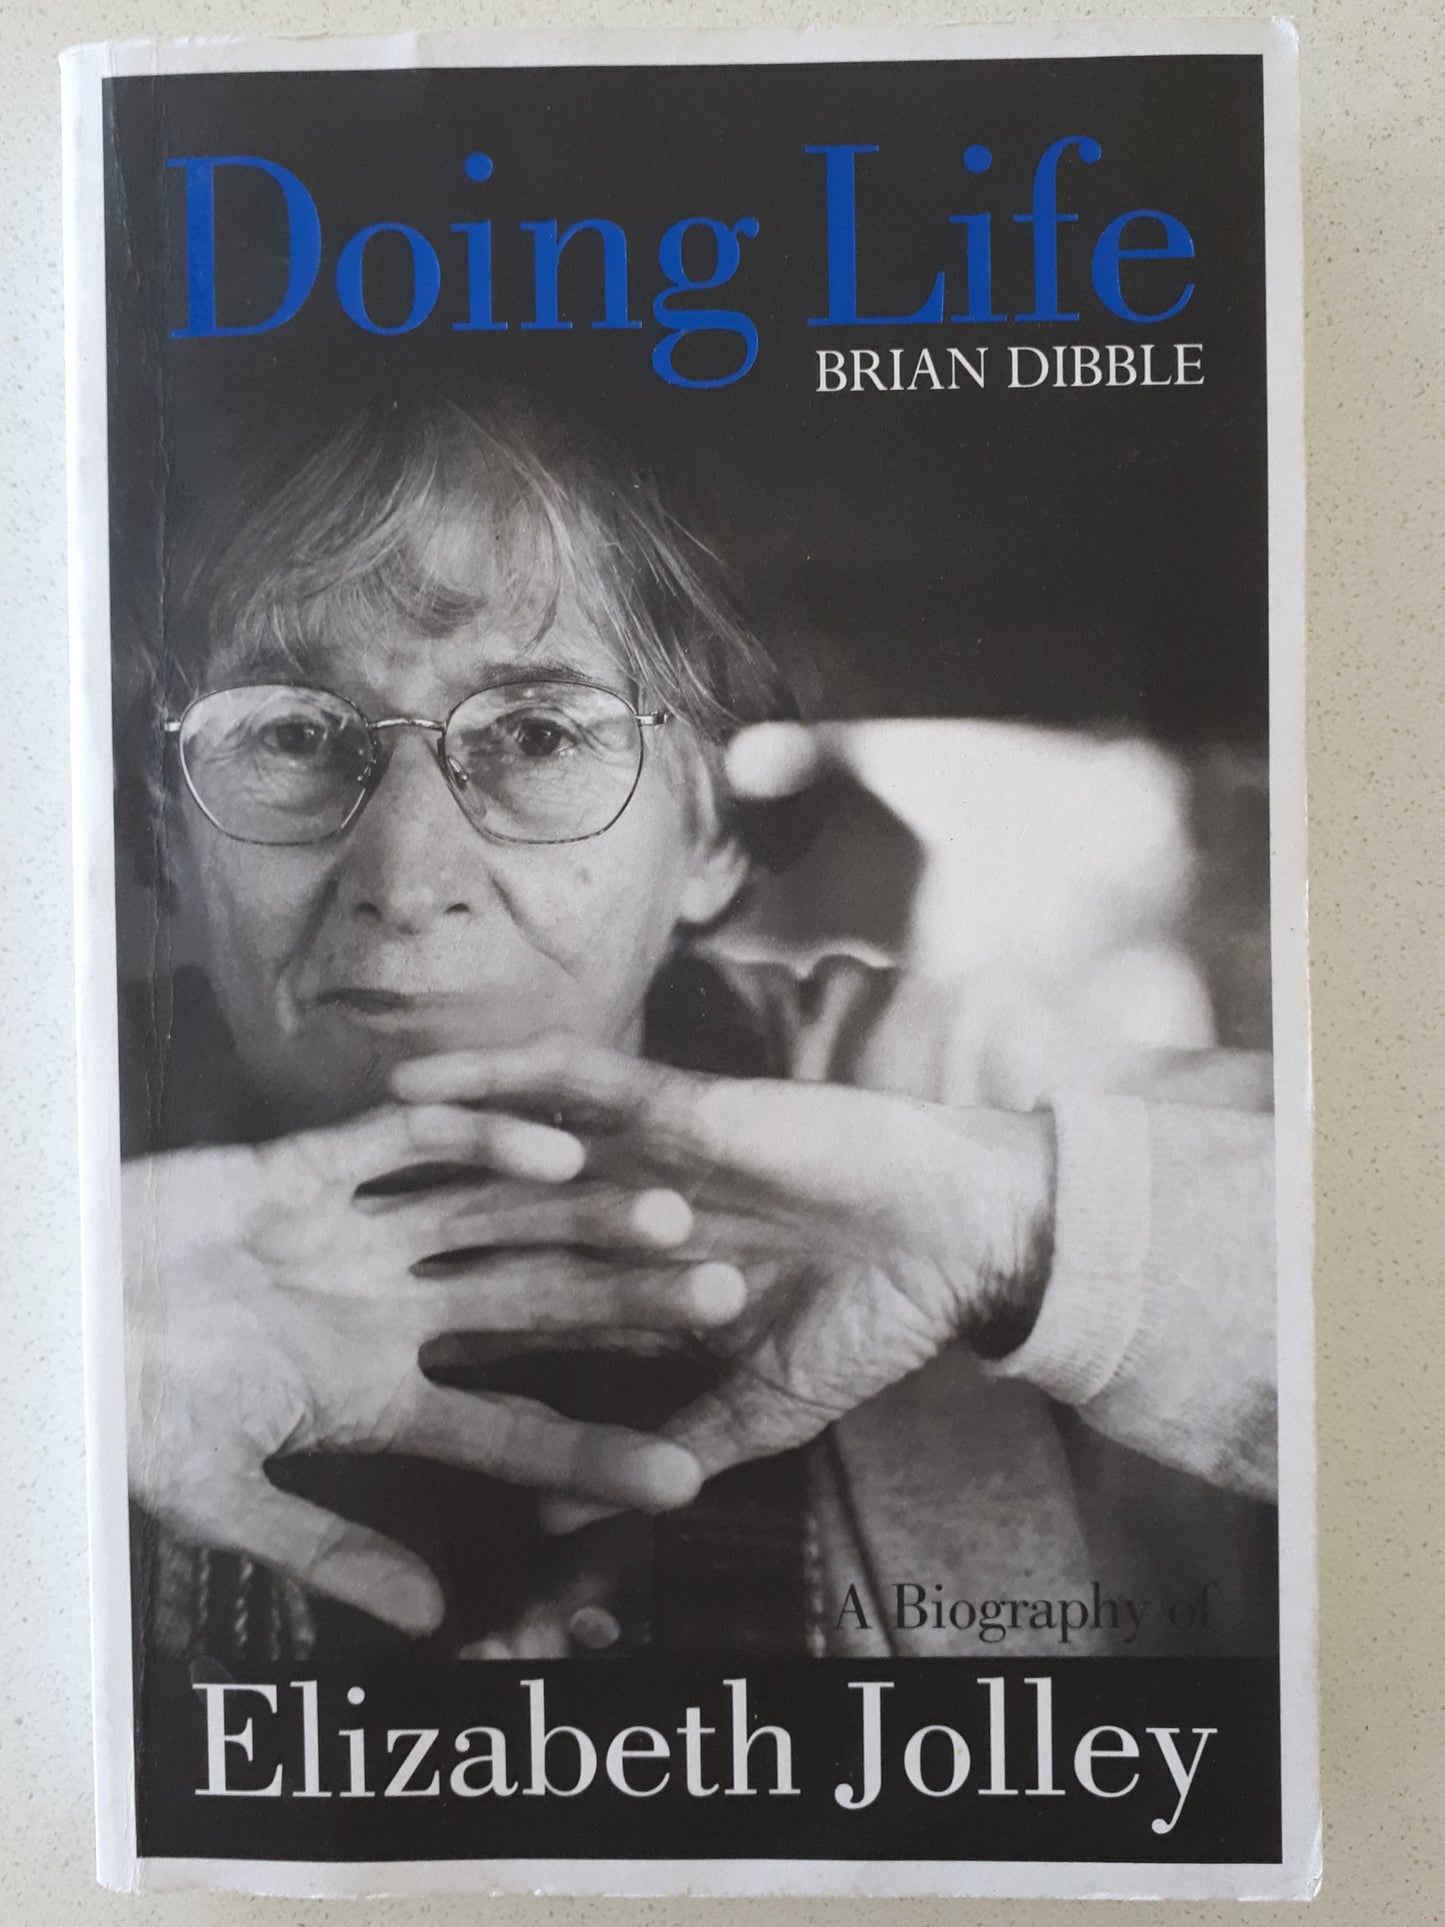 Doing Life: A Biography of Elizabeth Jolley by Brian Dibble